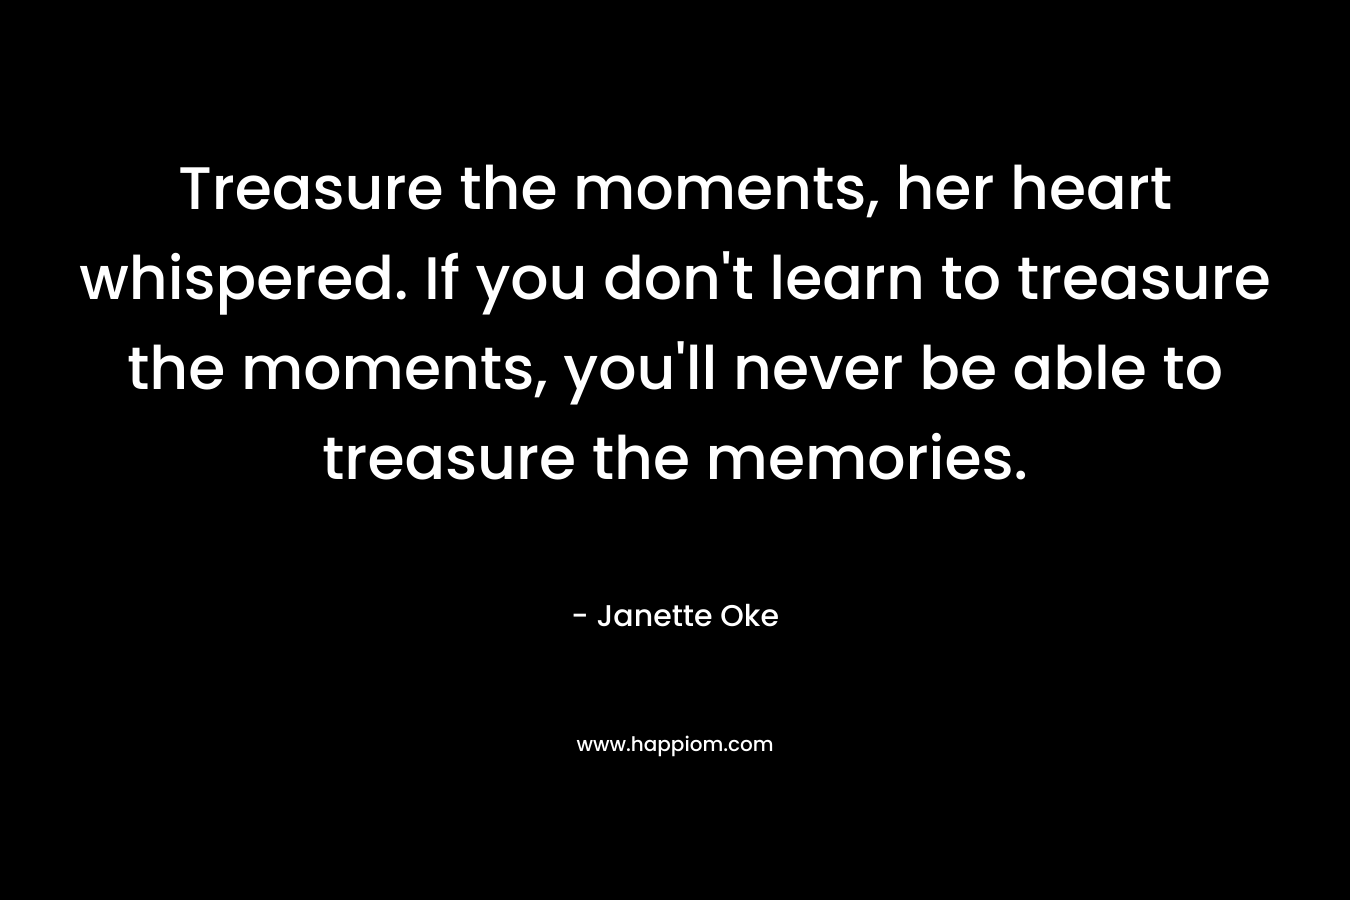 Treasure the moments, her heart whispered. If you don't learn to treasure the moments, you'll never be able to treasure the memories.